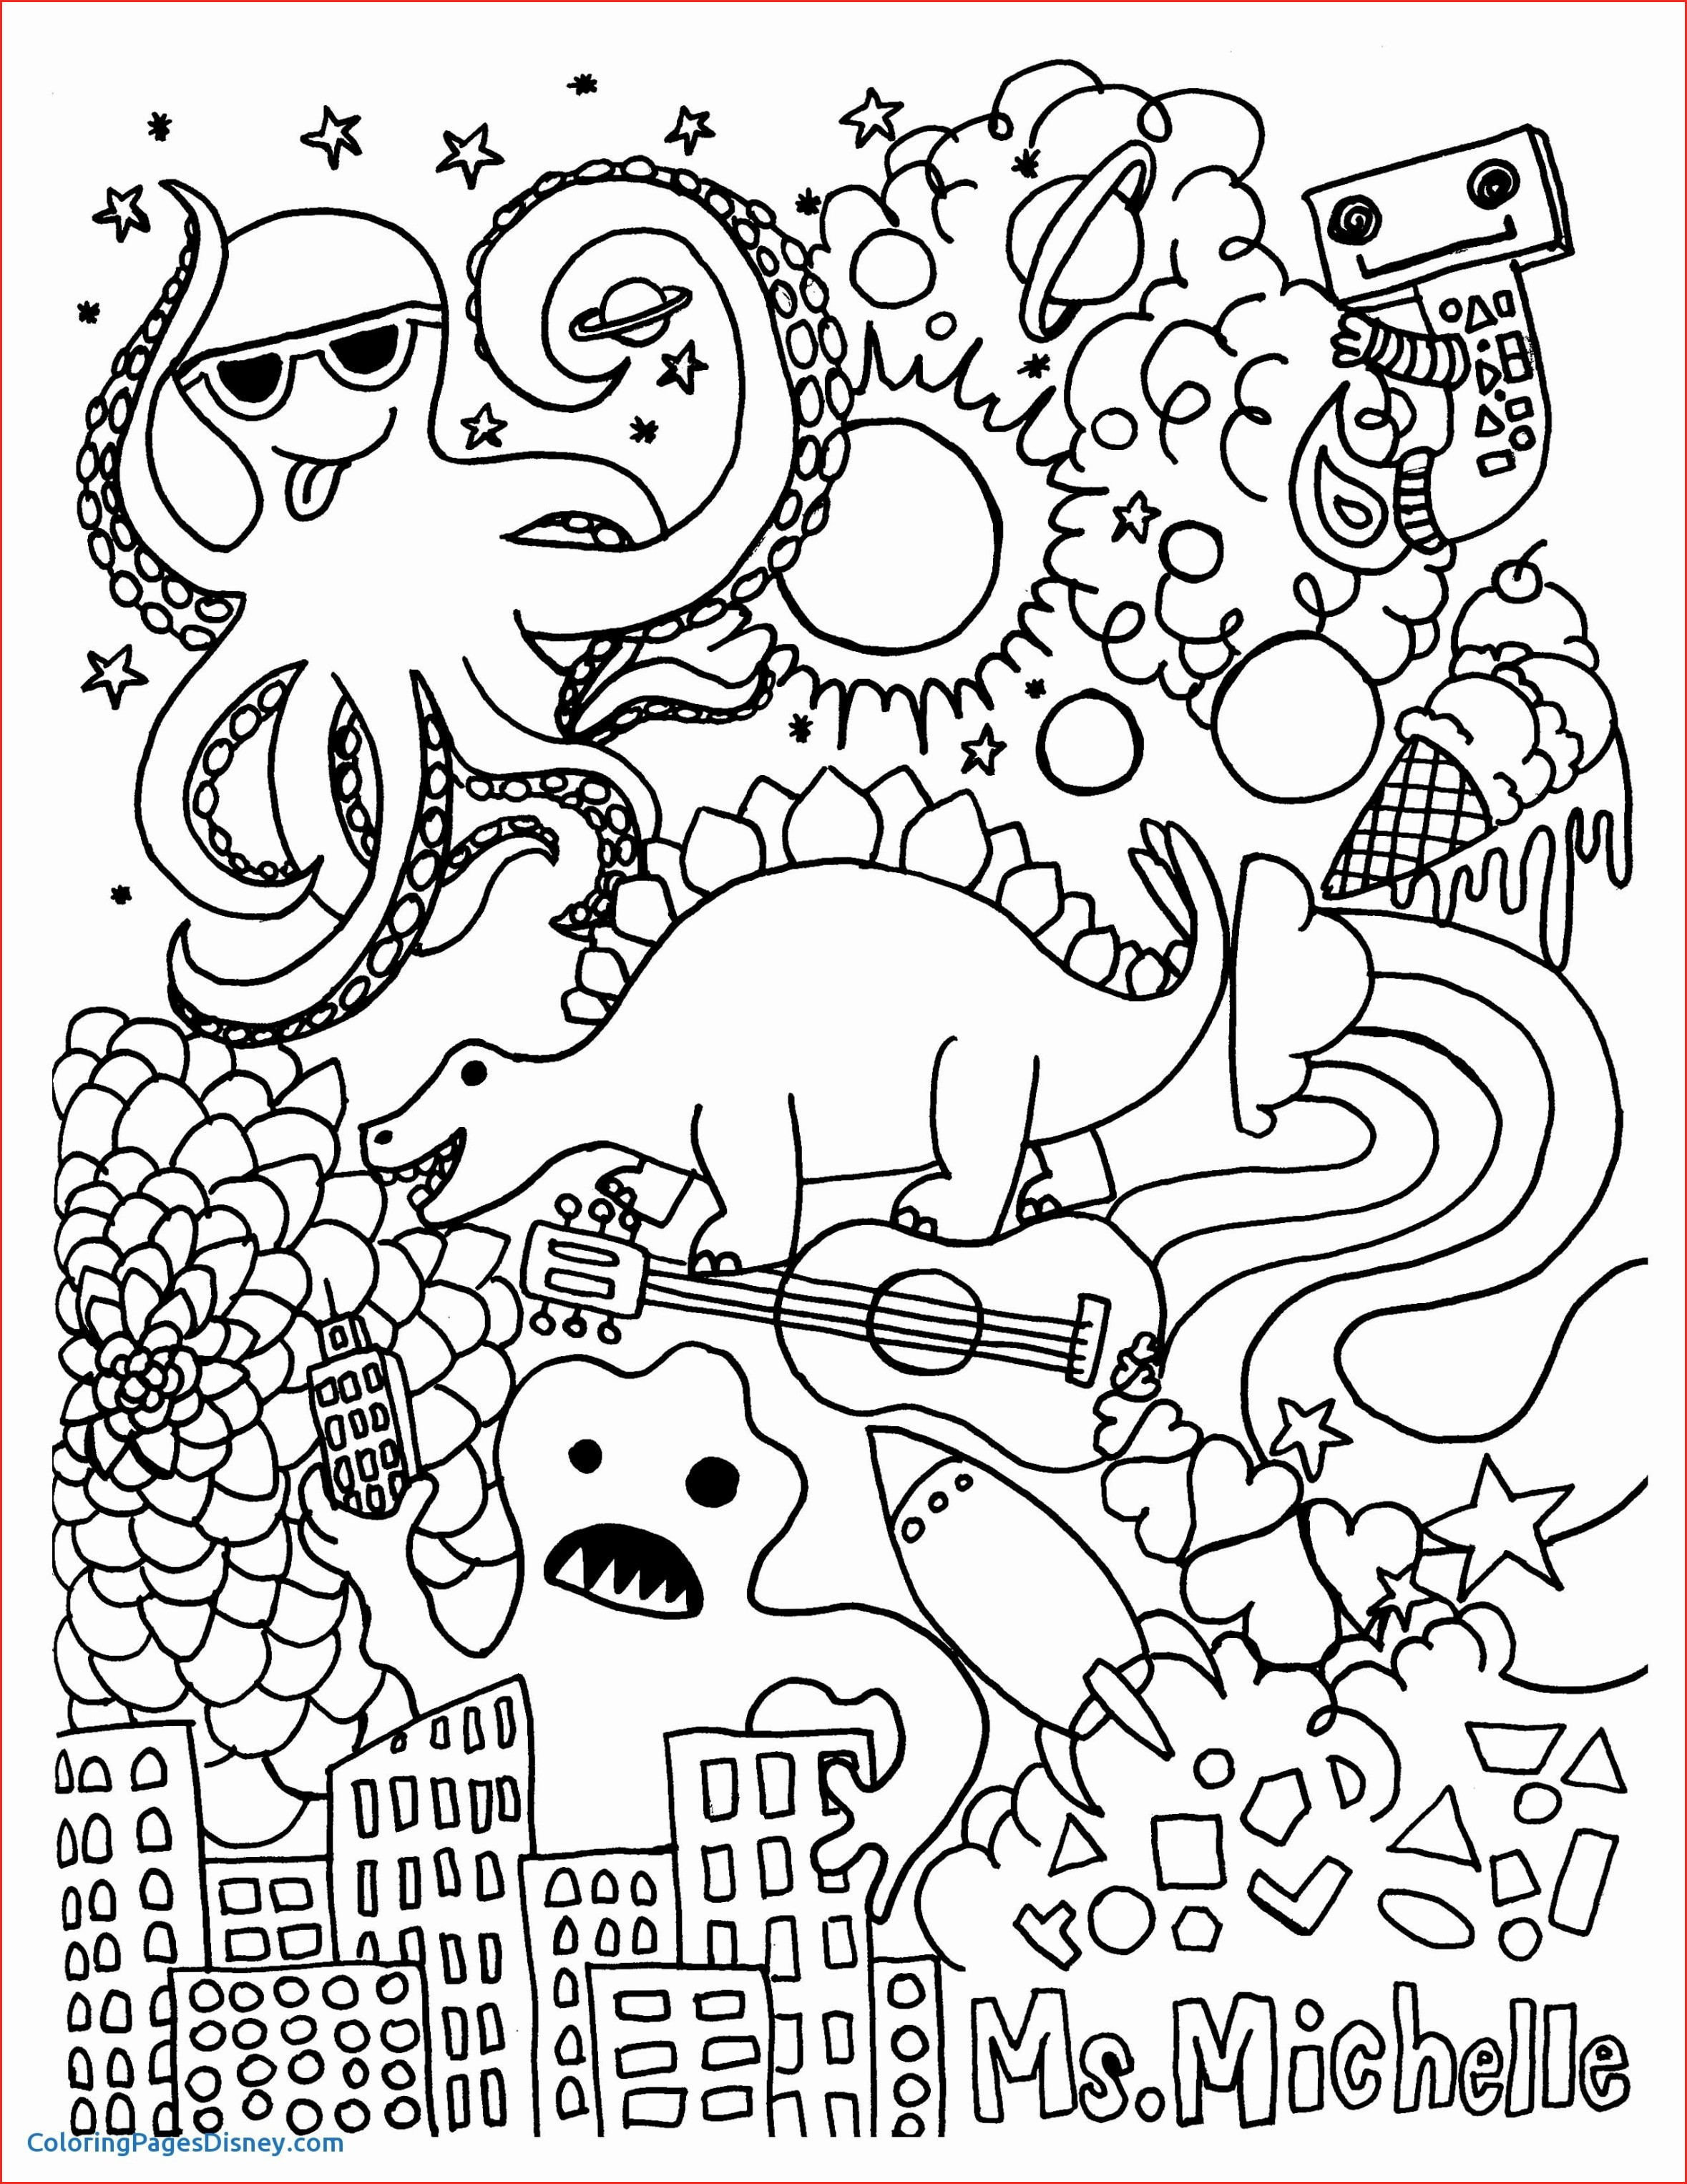 Interactive Coloring Pages Coloring Ideas Famous Paintings Coloring Pages Awesomenteractive